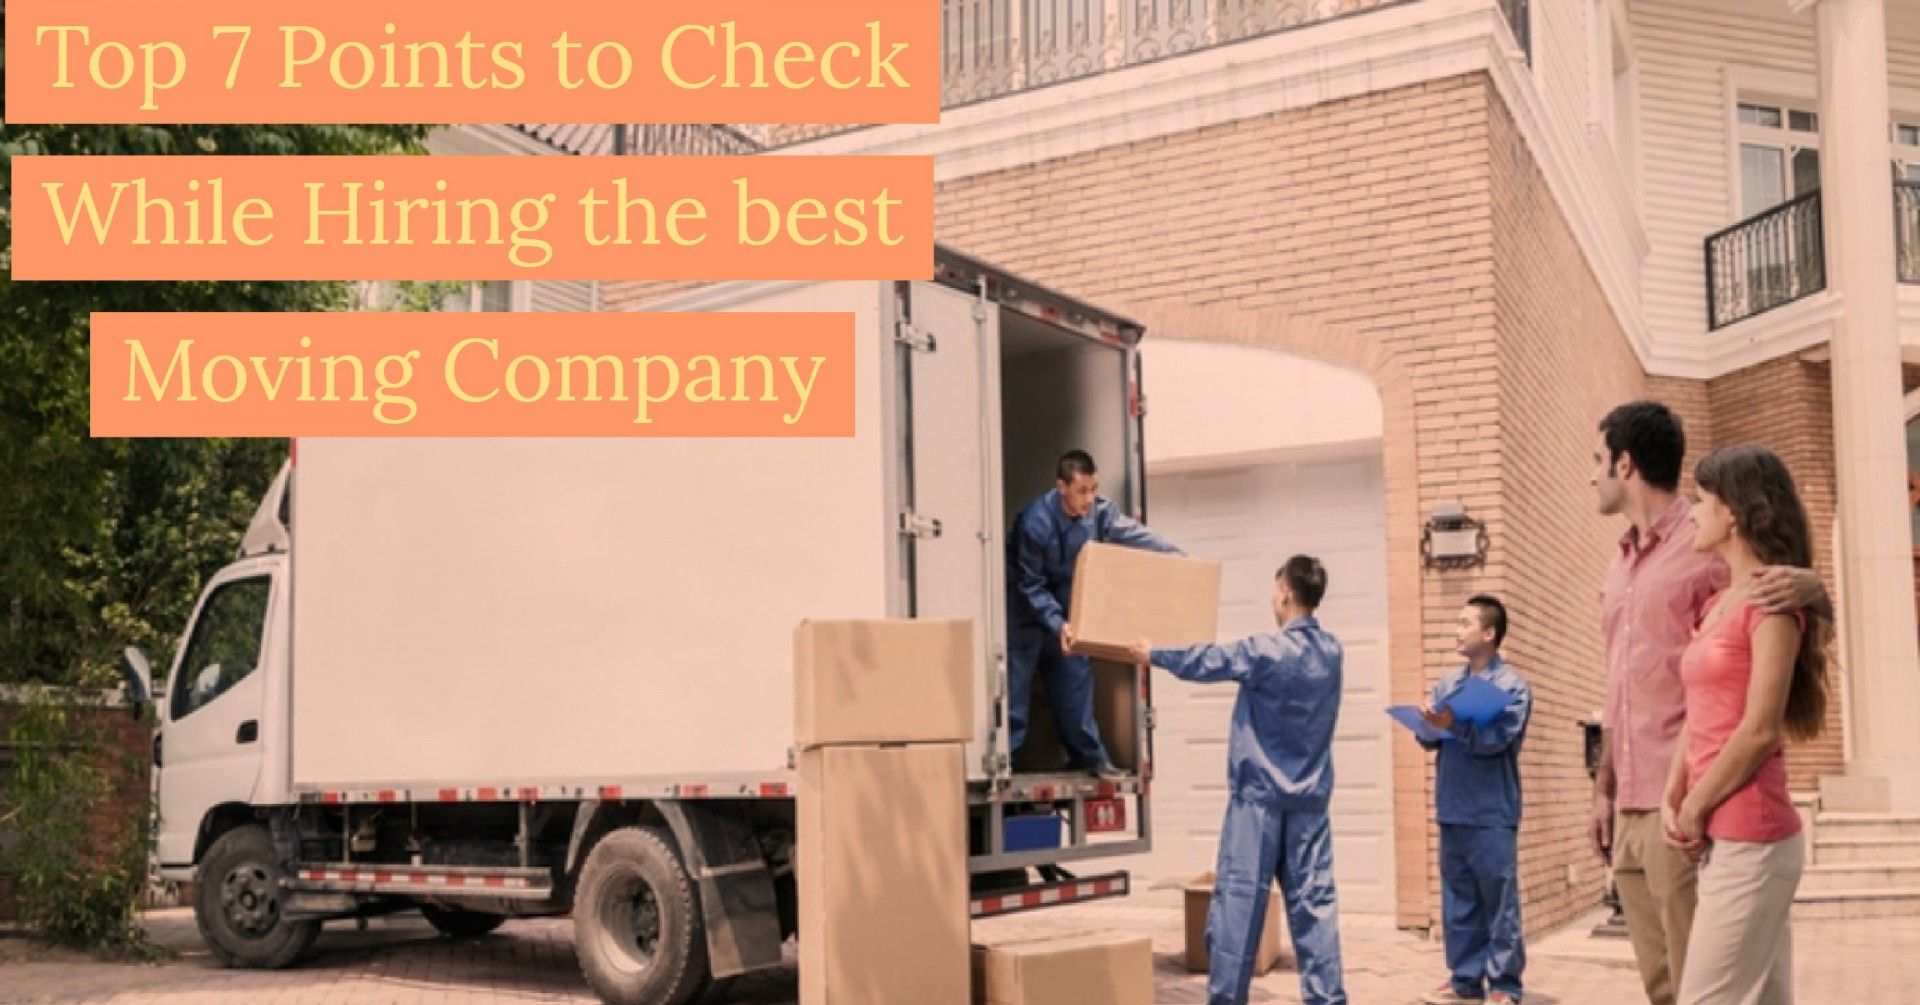 Top 7 Points to Check While Hiring the best Moving Company in Australia